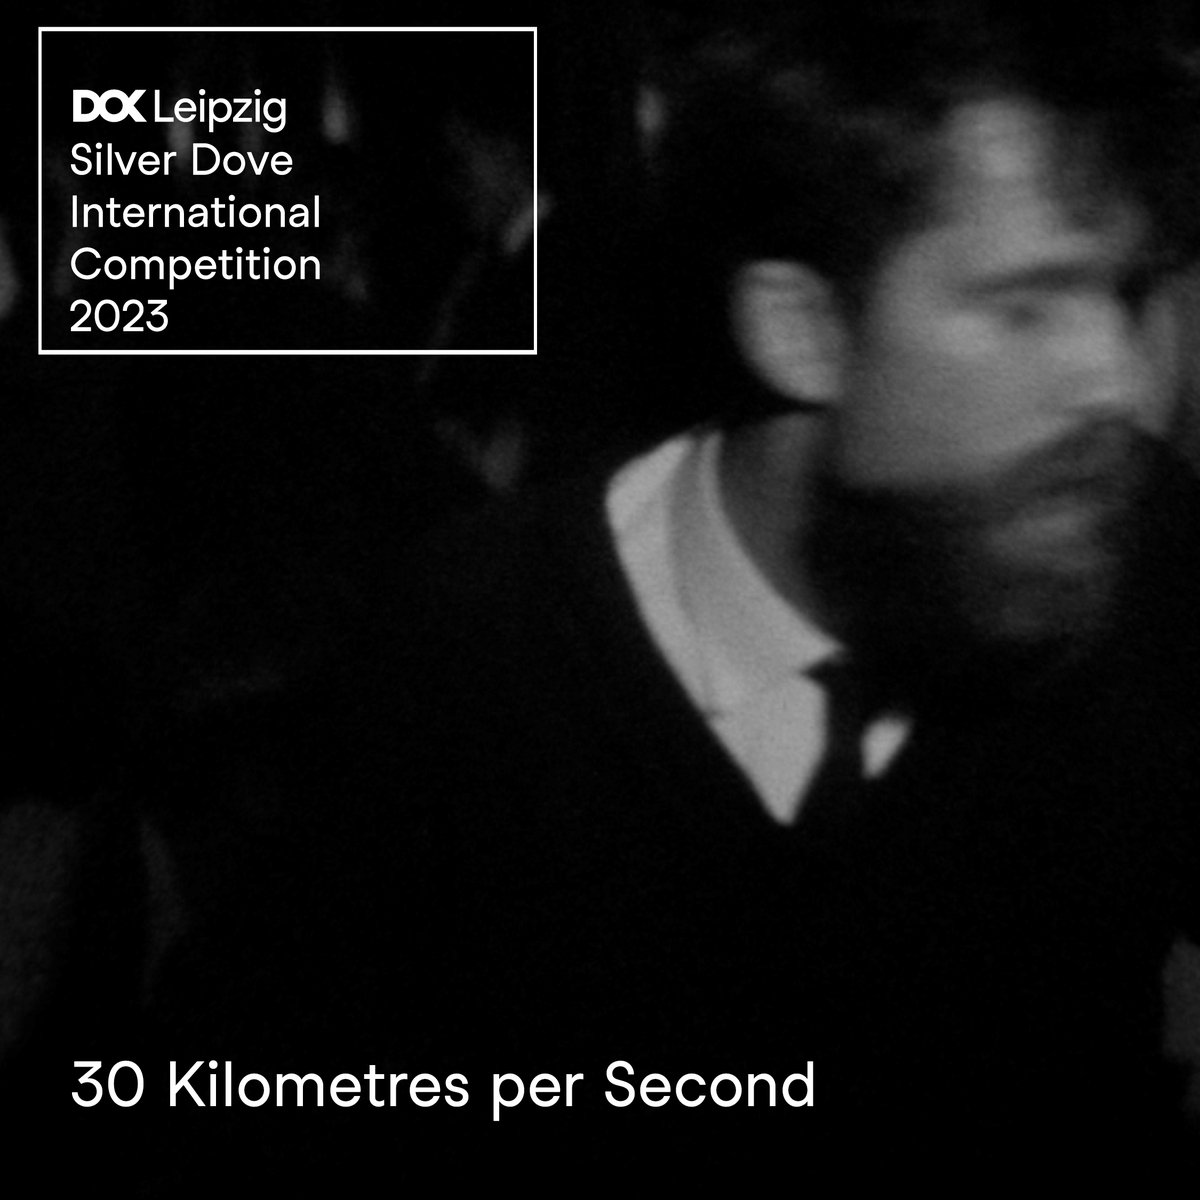 '30 Kilometres per Second” that's how fast The Silver Dove is gonna fly home with Jani Peltonen! He wins the best short documentary by an up-and-coming director, sponsored by the Sächsische Landesanstalt für privaten Rundfunk und neue Medien (SLM).